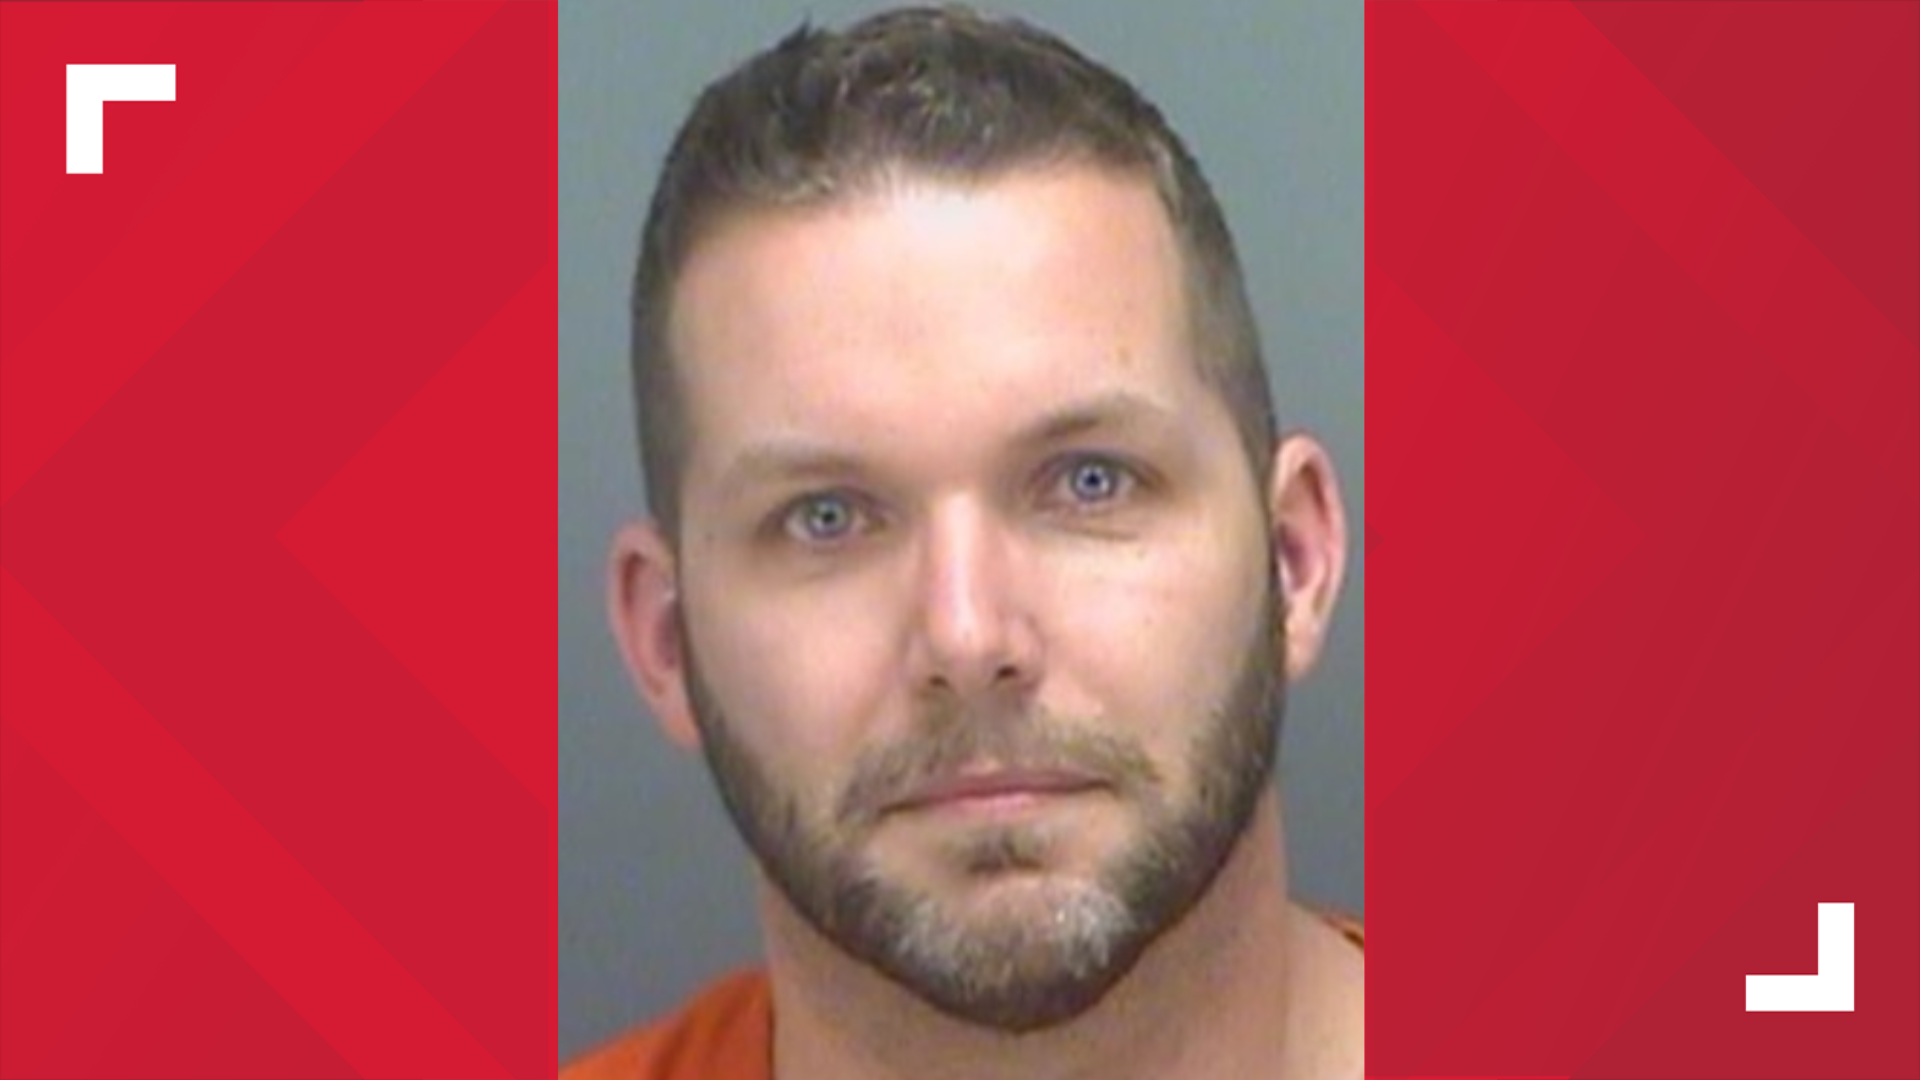 Kyle Ritsema, a former assistant principal in Pasco County, will spend the next 35 years of his life in prison for producing, distributing and possessing child porn.